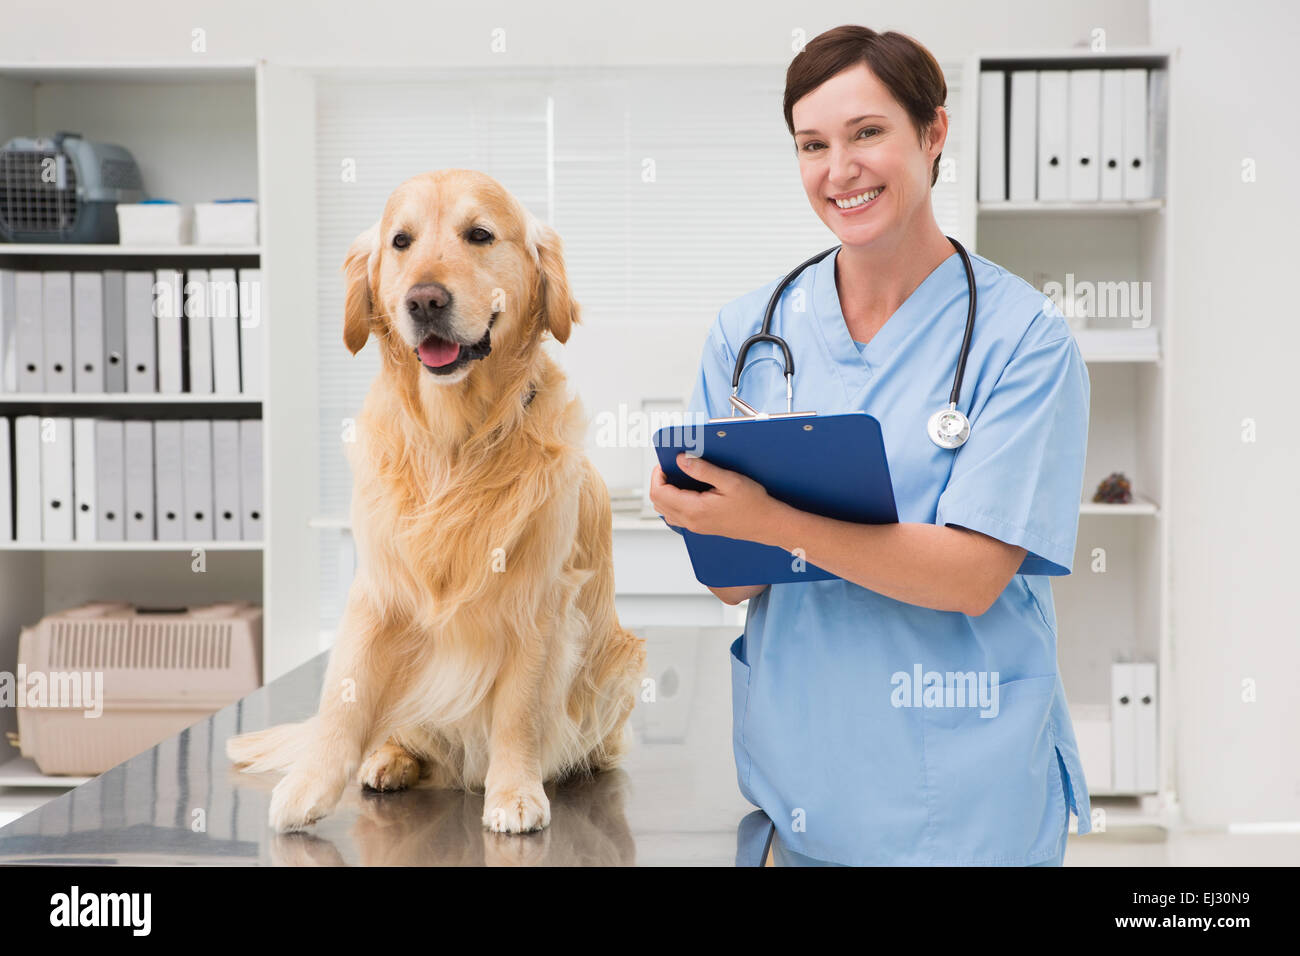 Vet examining a dog and writing on clipboard Stock Photo